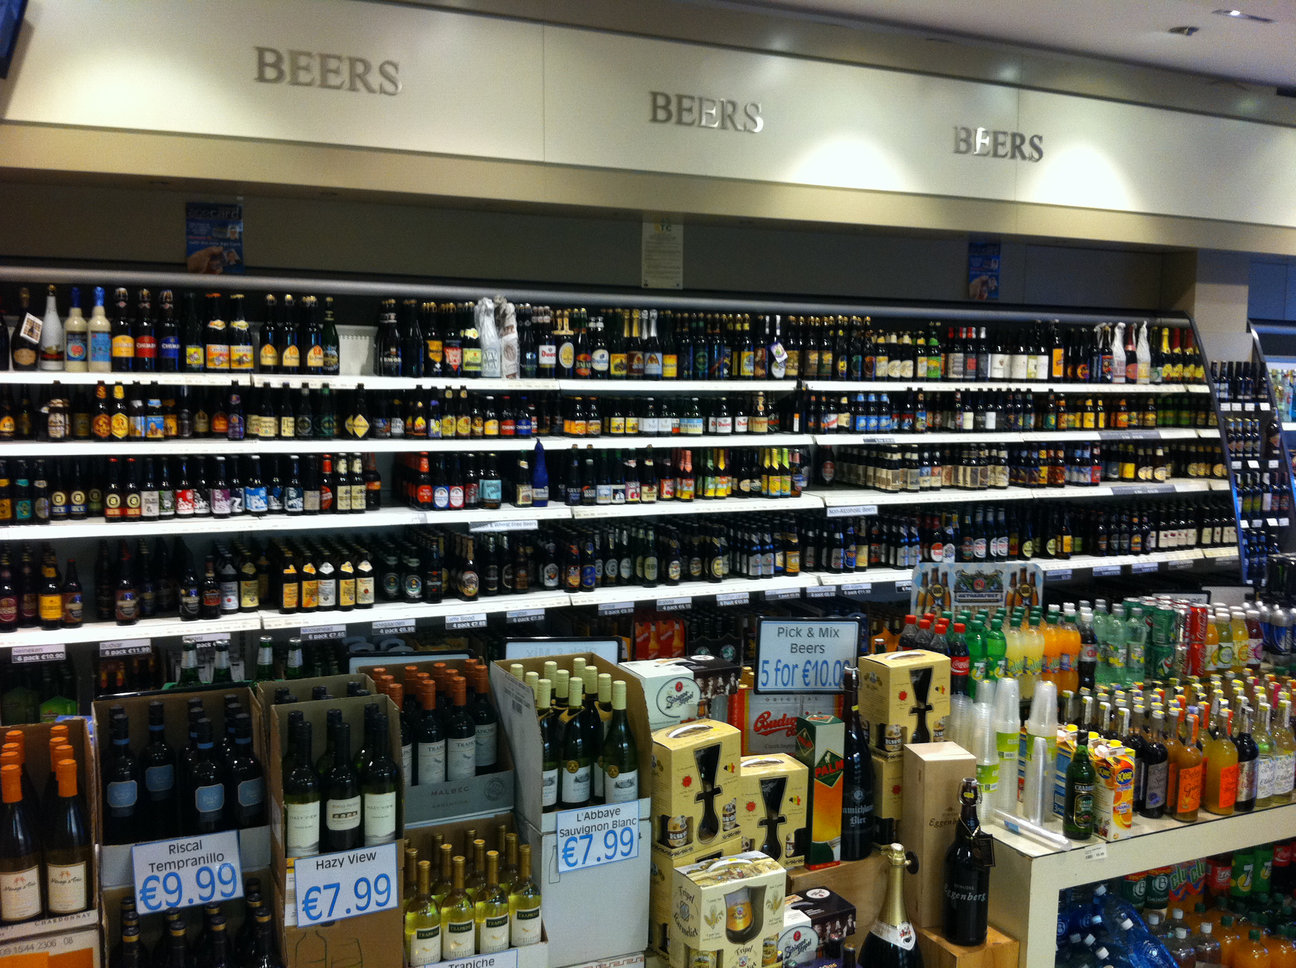 Purchasing of beer, cider and wine for home consumption was down 9.5% for the eight-week period compared to last year.